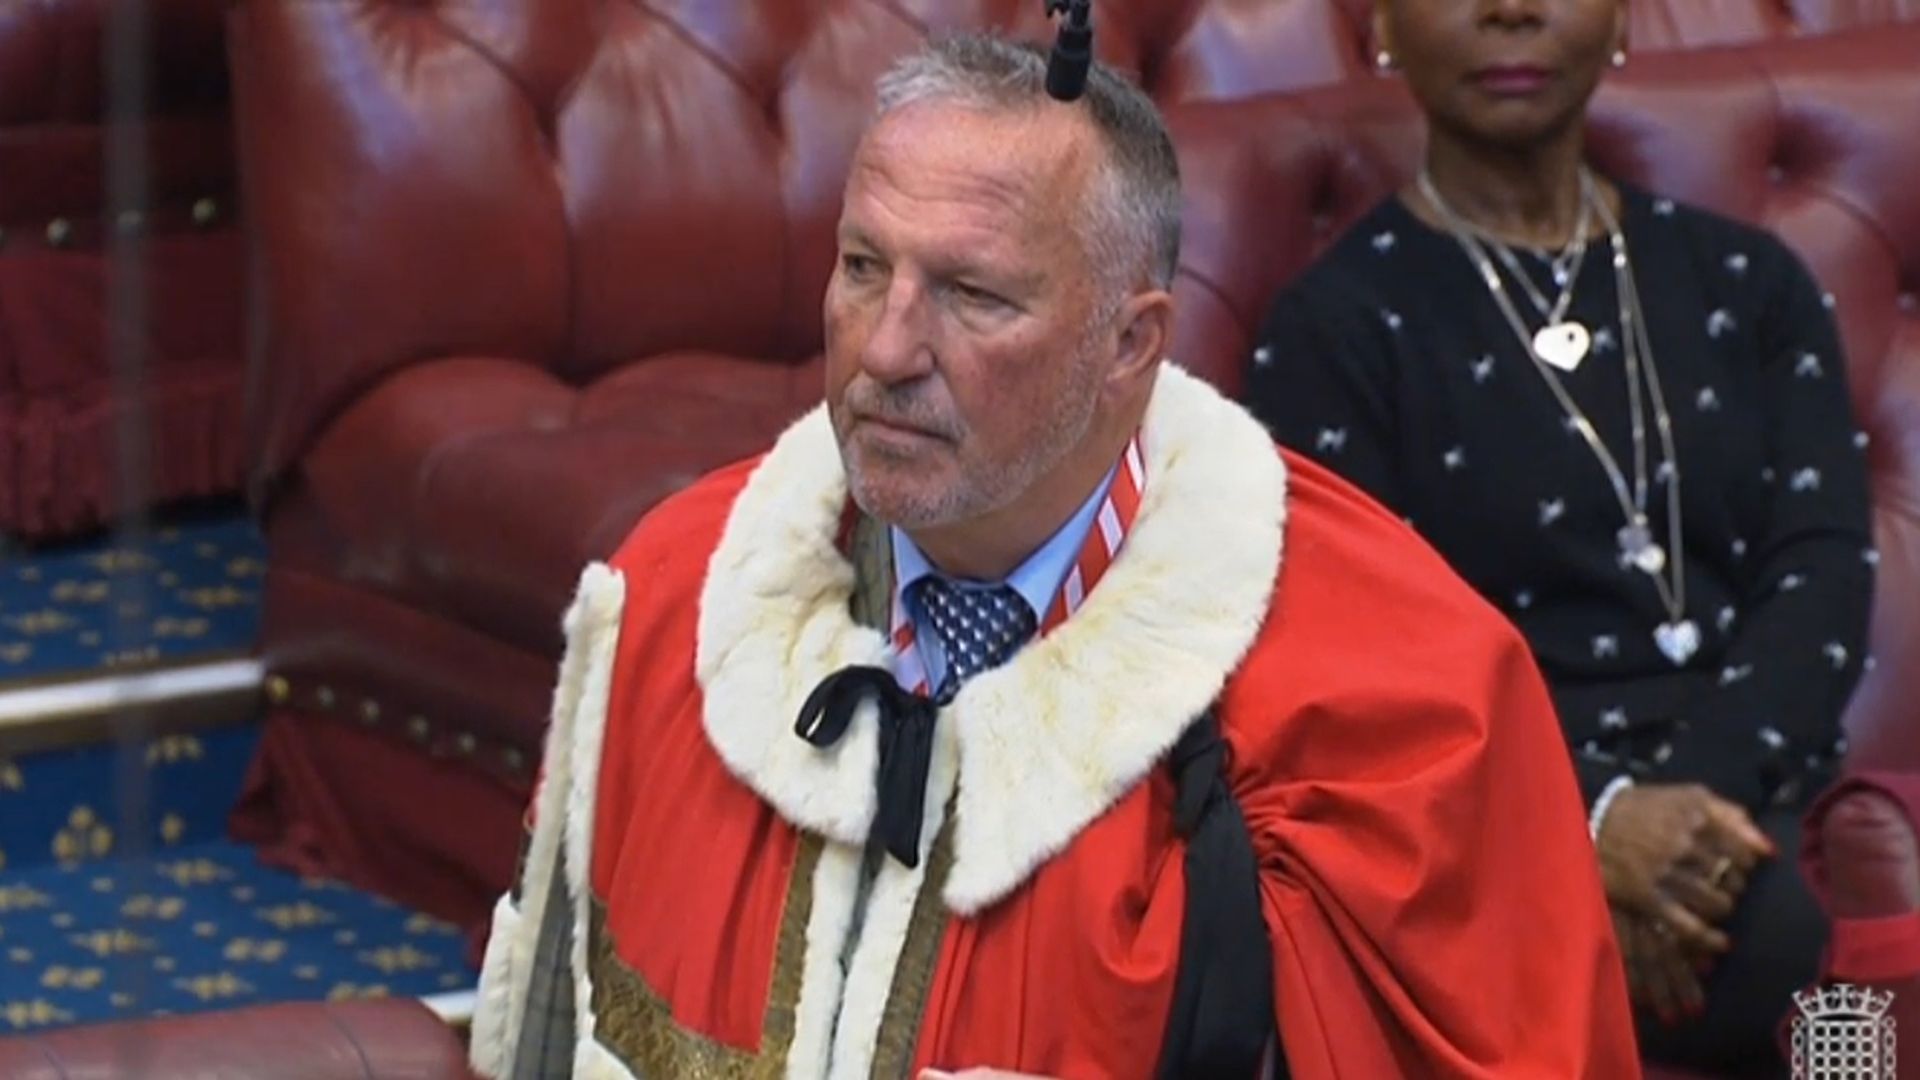 Ian Botham is introduced to the House of Lords - Credit: Parliament Live